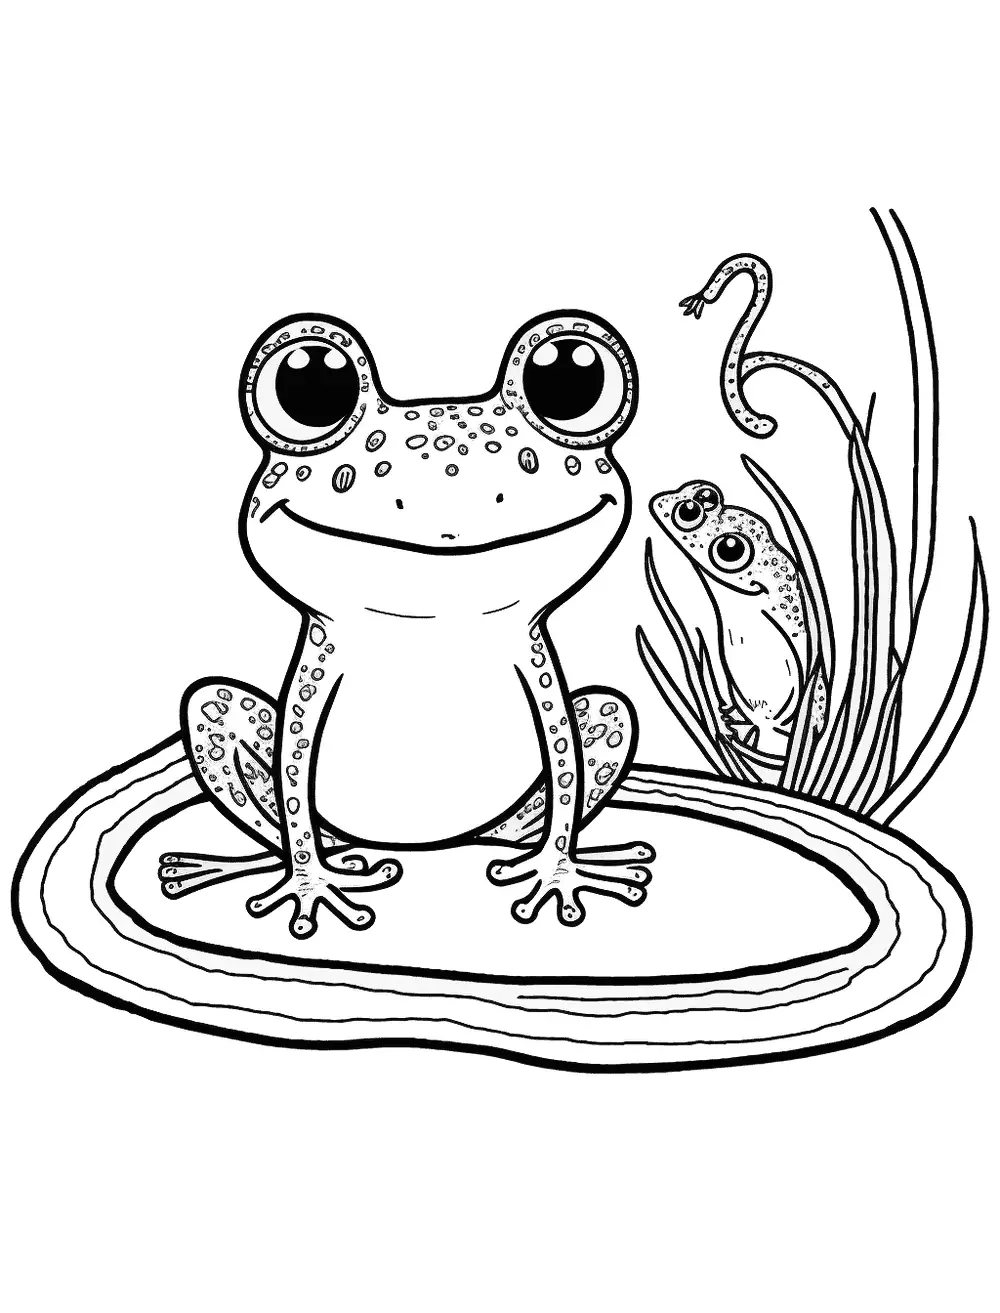 Frog And Snake Coloring Page - A frog and a snake, with a friendly interaction